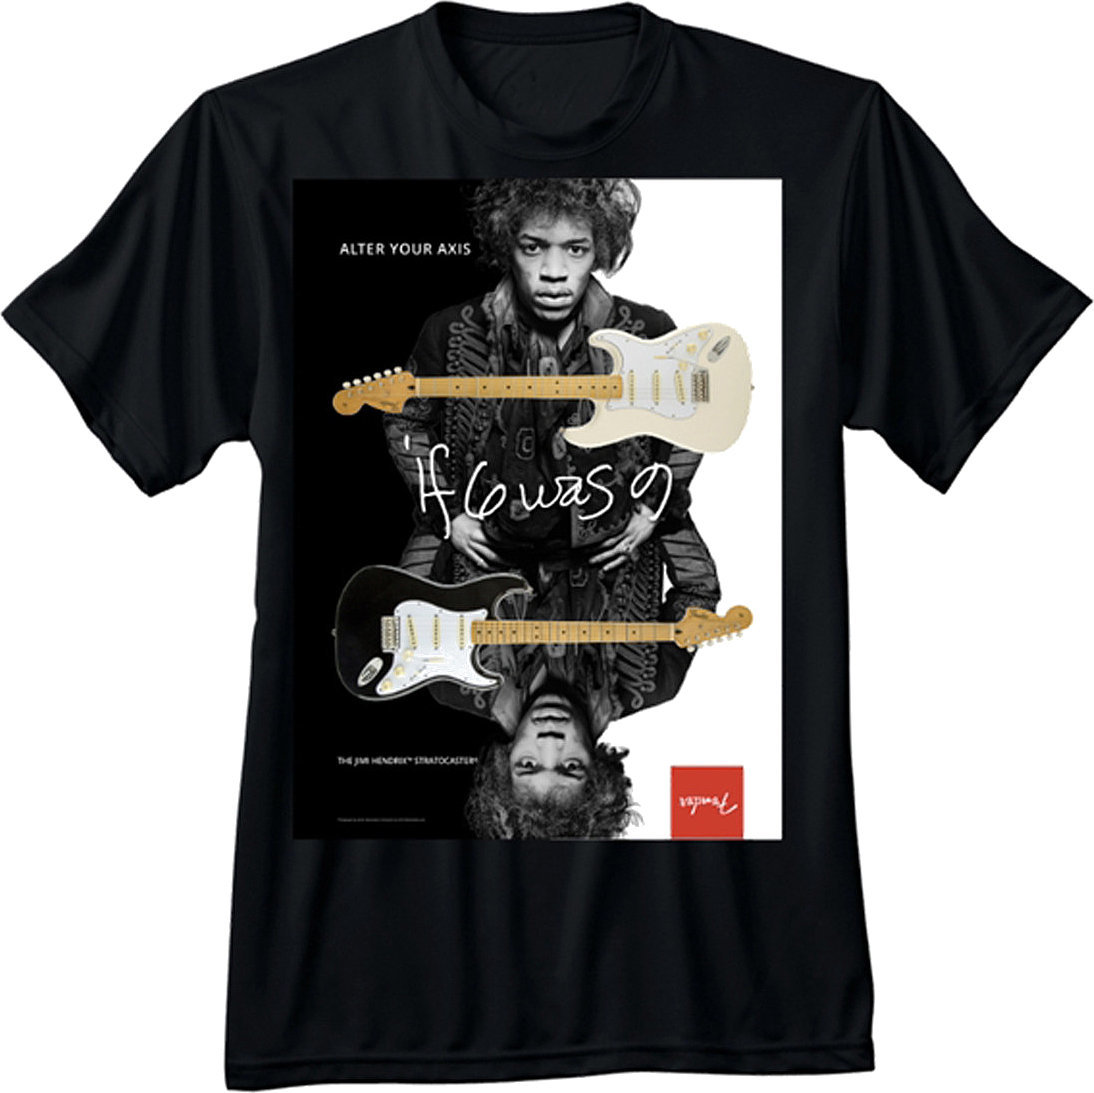 Shirt Fender Jimi Hendrix Collection Alter Your Axis T-Shirt Black M